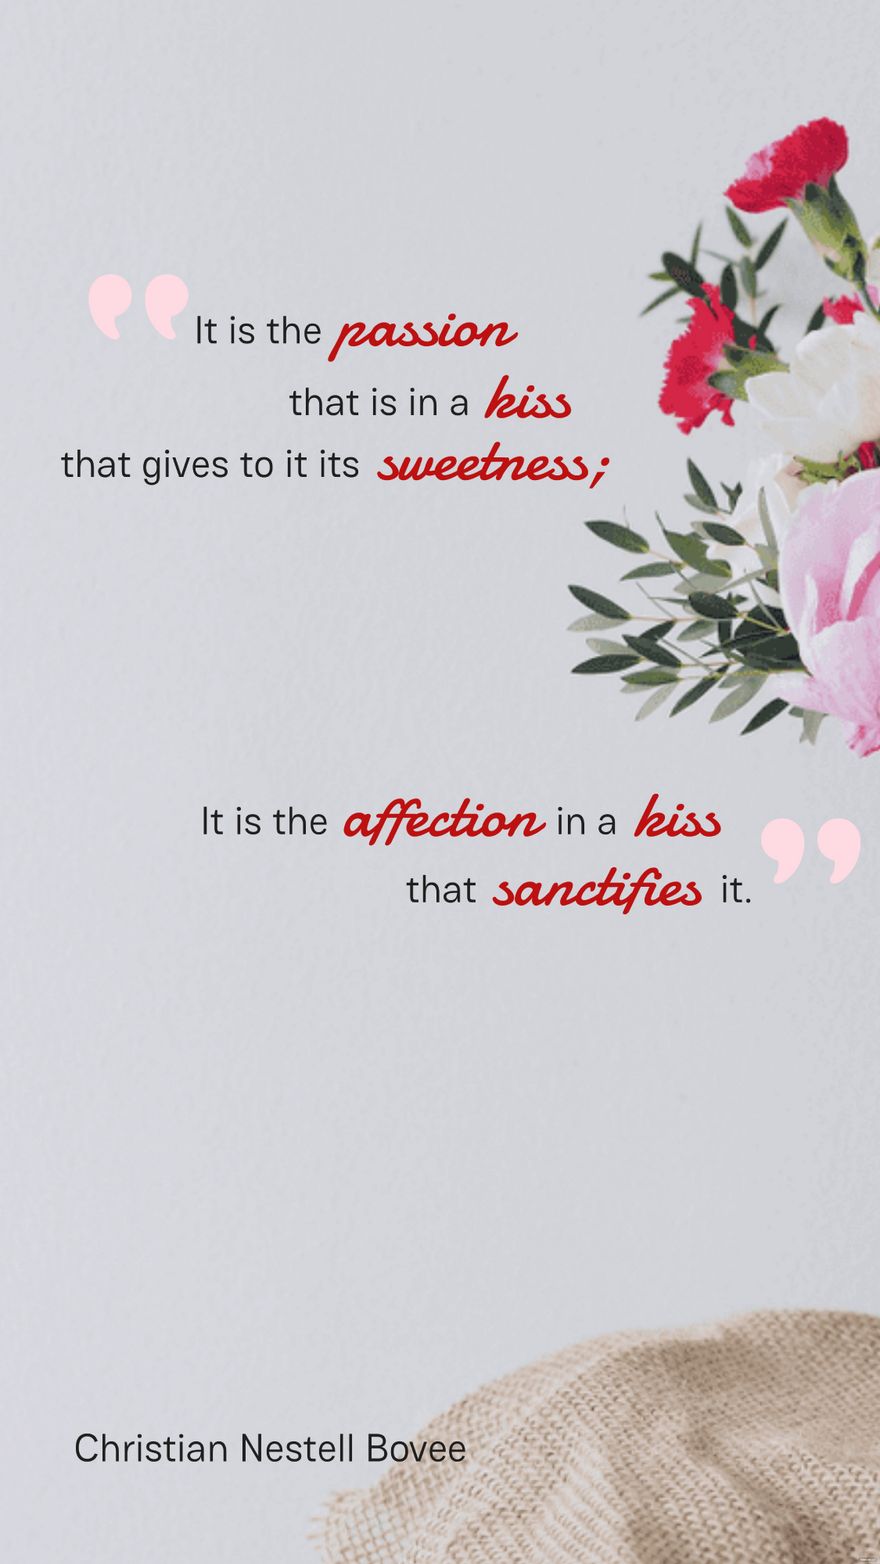 Christian Nestell Bovee - It is the passion that is in a kiss that gives to it its sweetness; it is the affection in a kiss that sanctifies it.